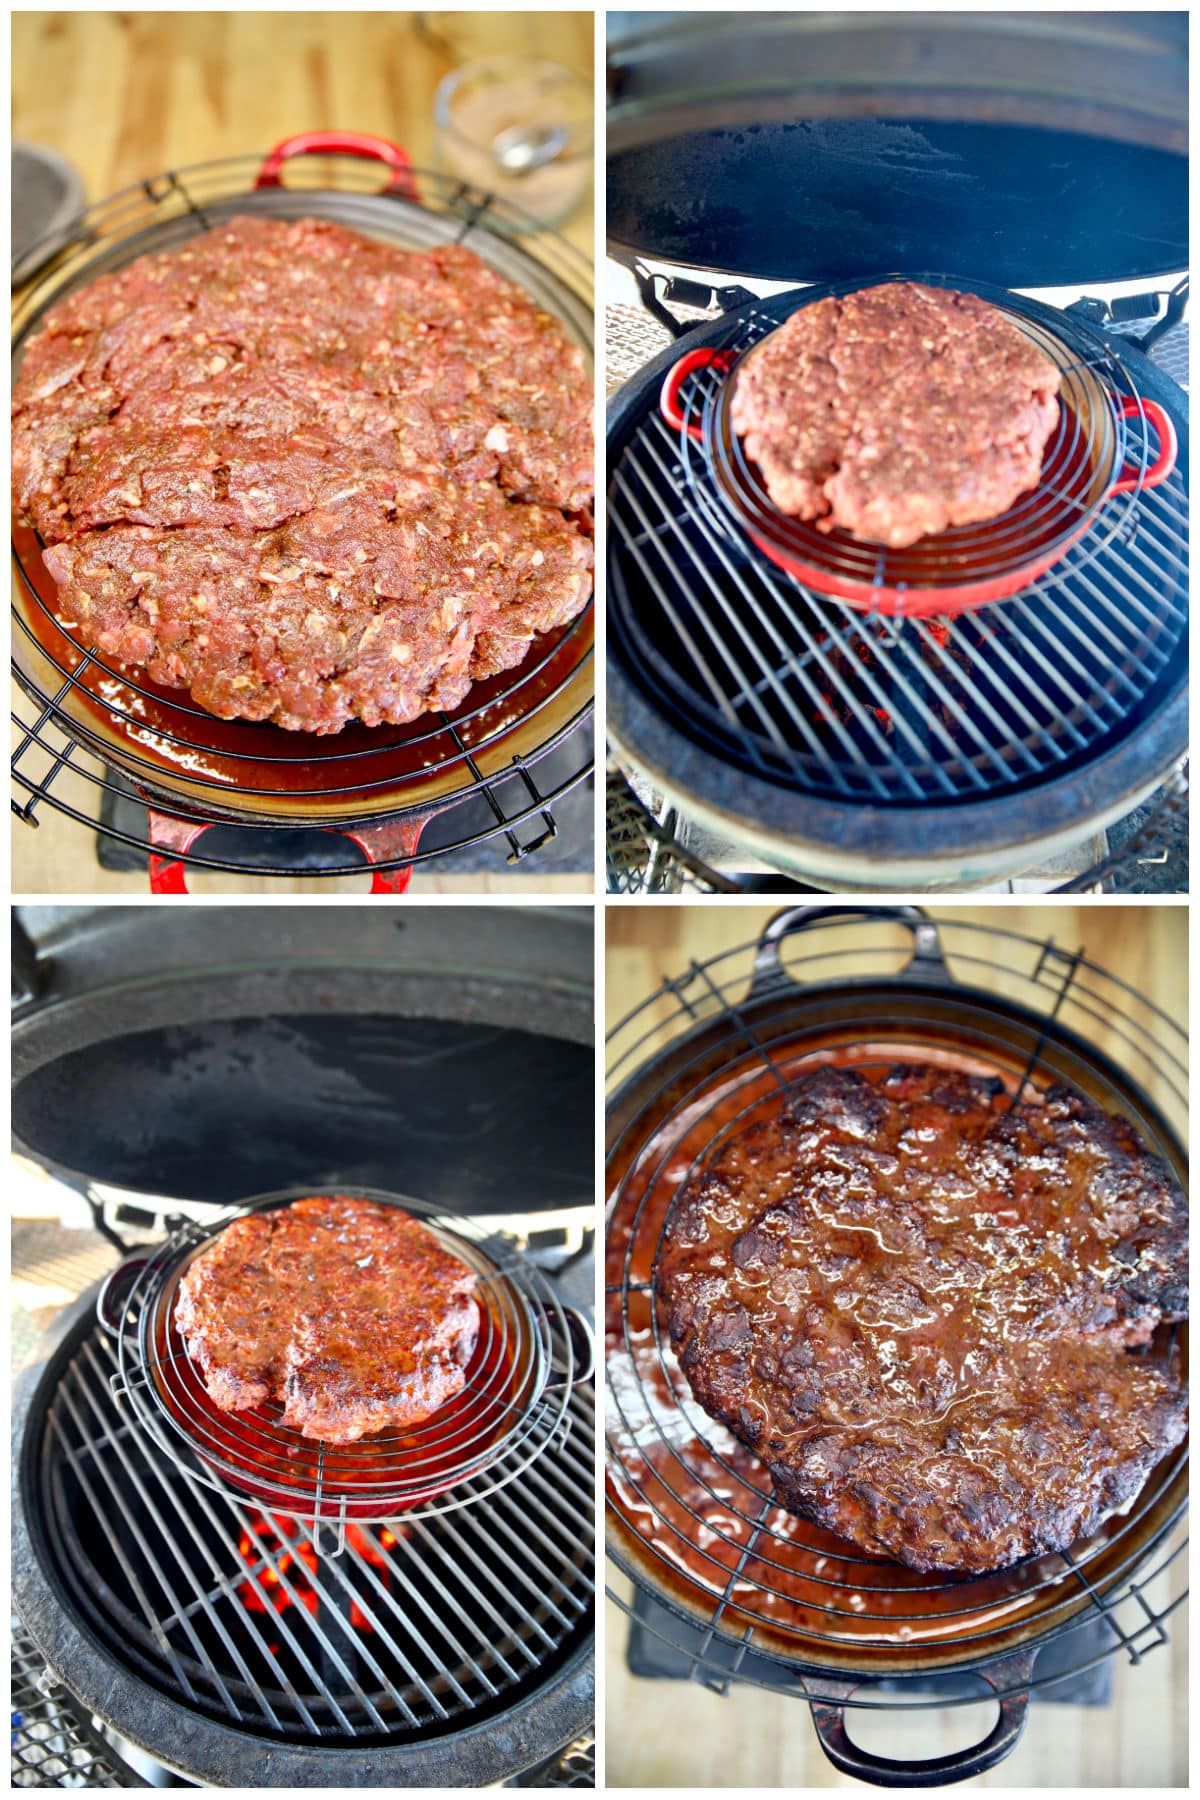 Collage over the top chili on the grill.